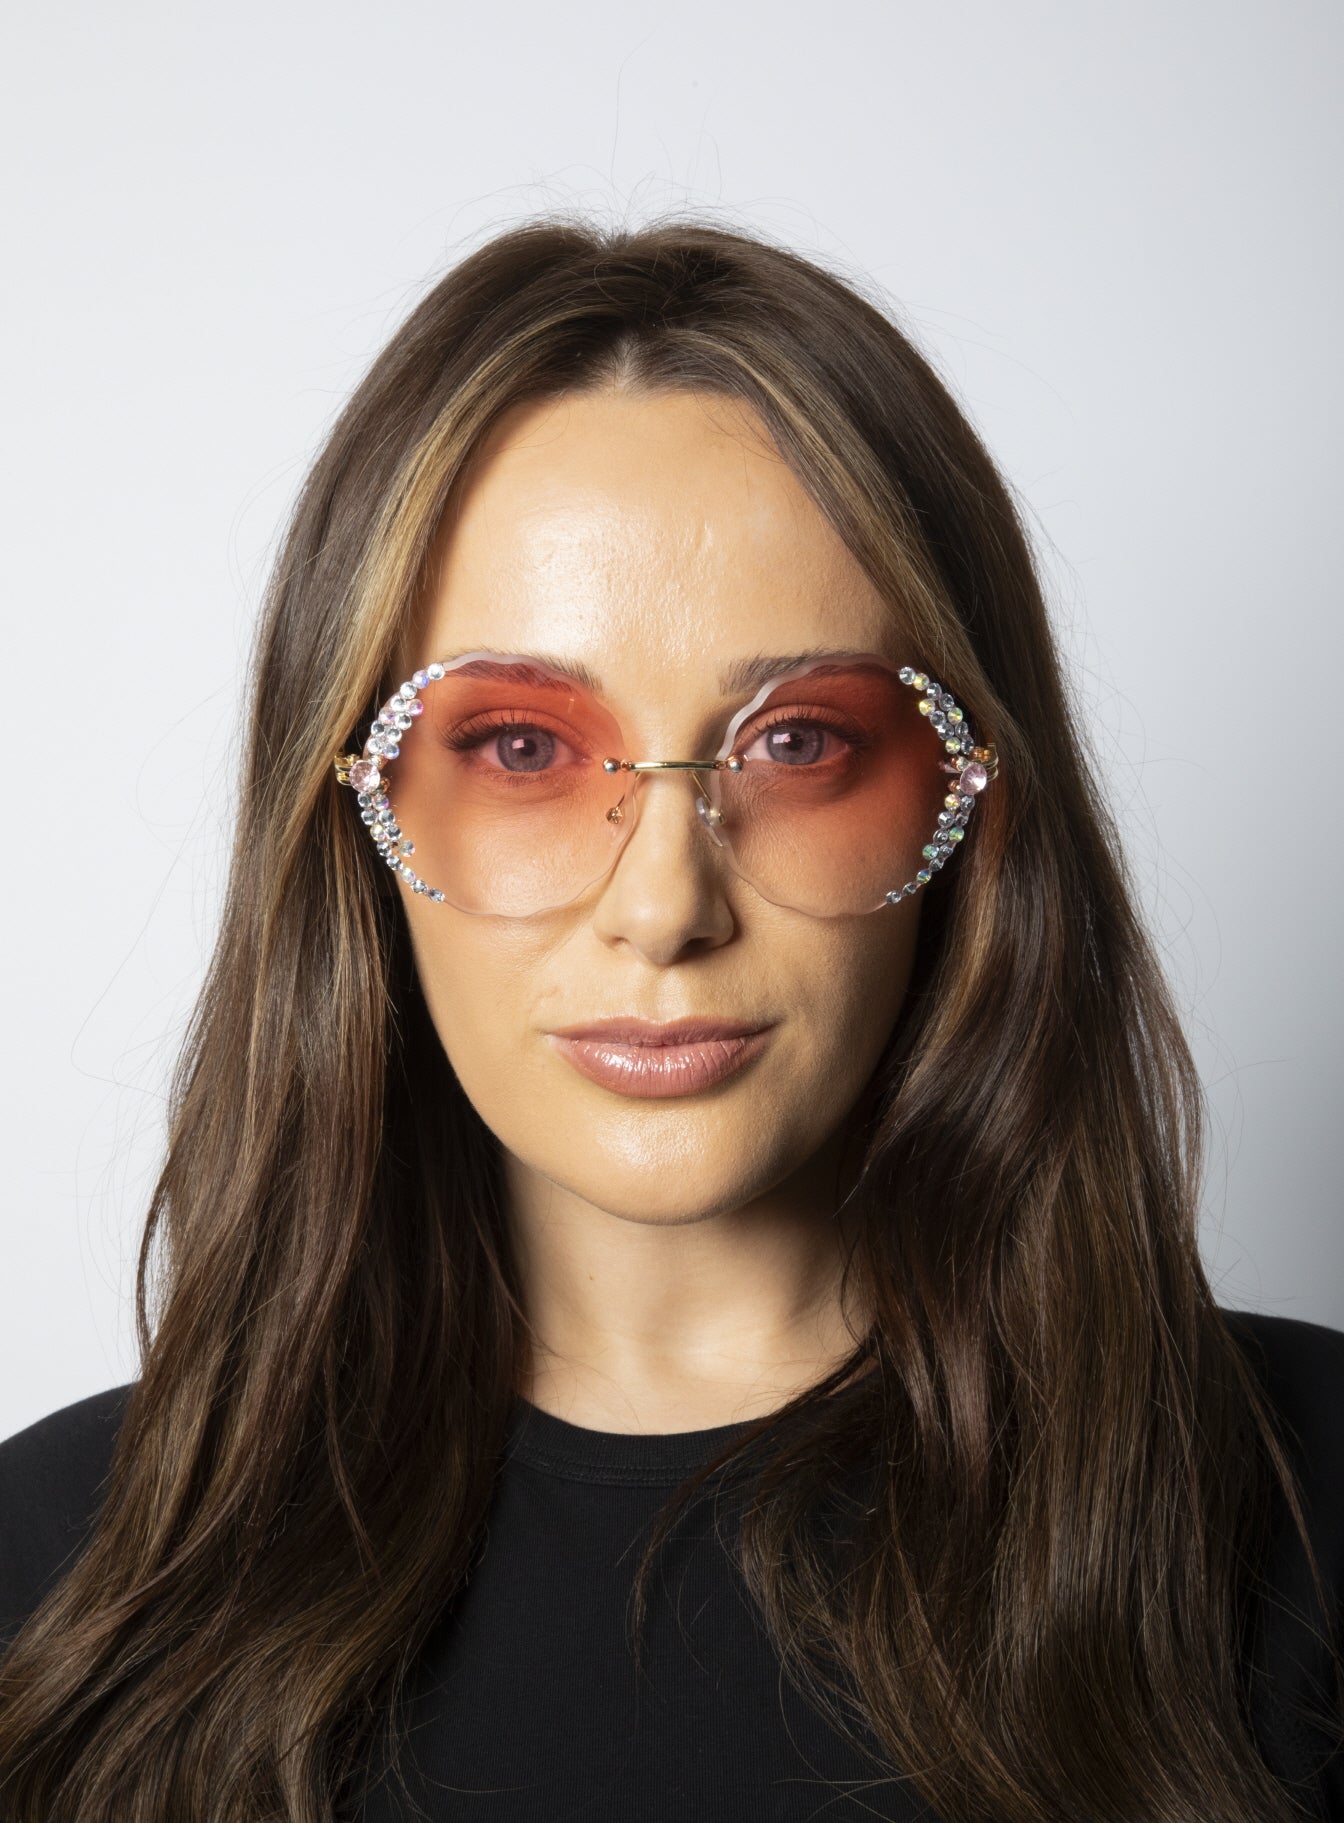 Oversized Round Frameless Sunglasses with Crystal Detail in Pink